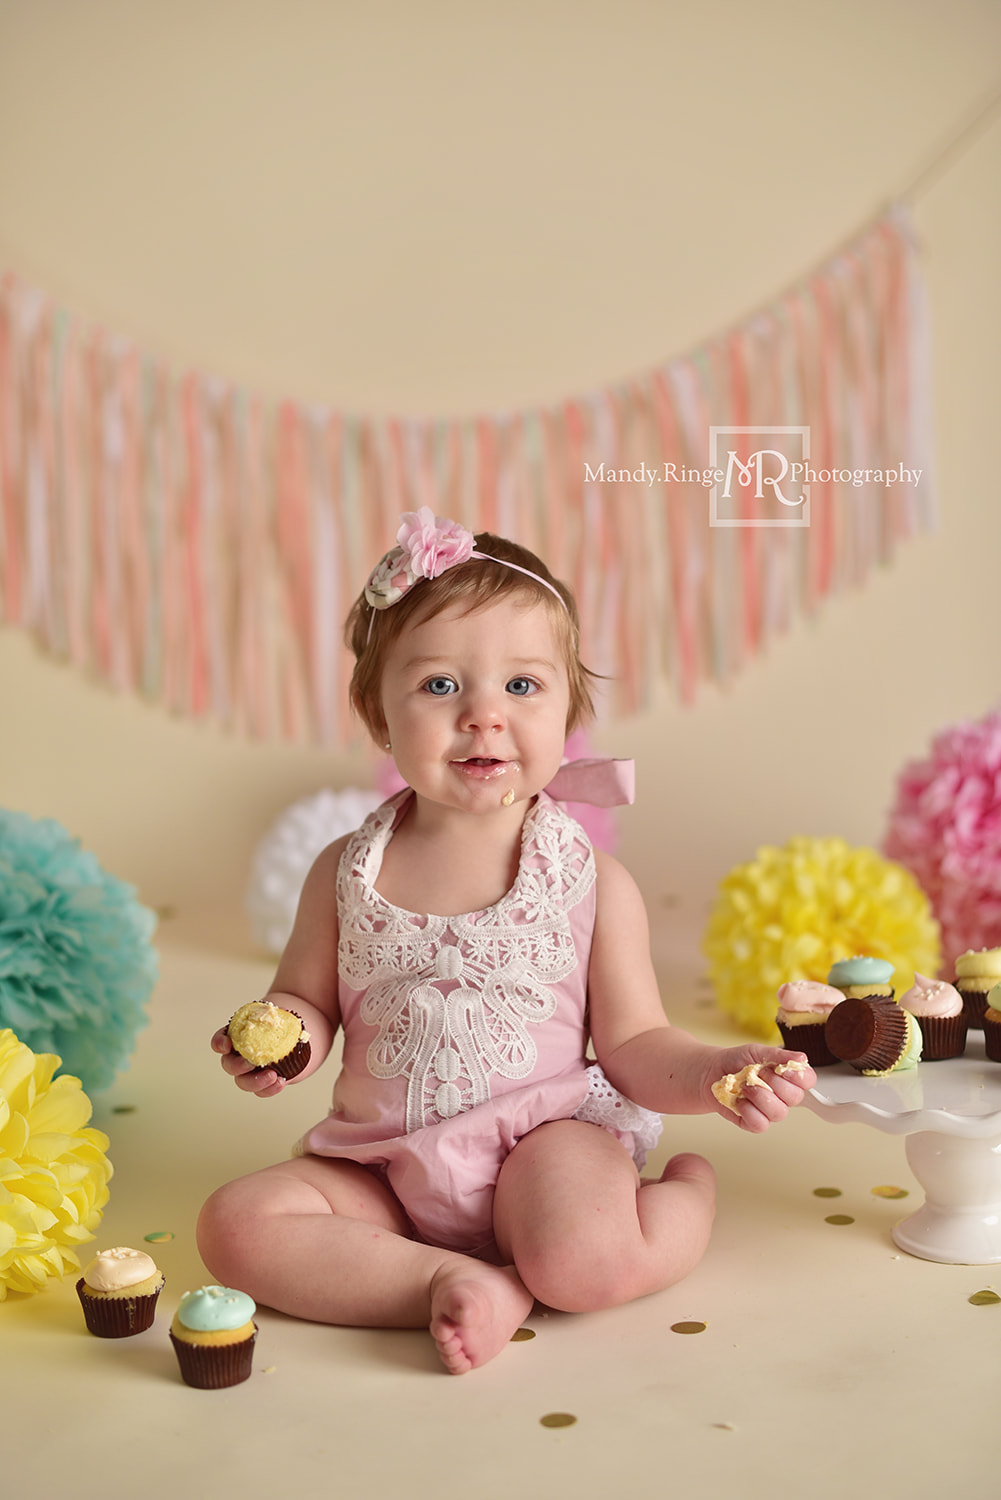 Sibling portraits // girls, cupcakes, pastels, colorful, rainbow, spring, The Sugar Path // St. Charles, IL studio // by Mandy Ringe Photography